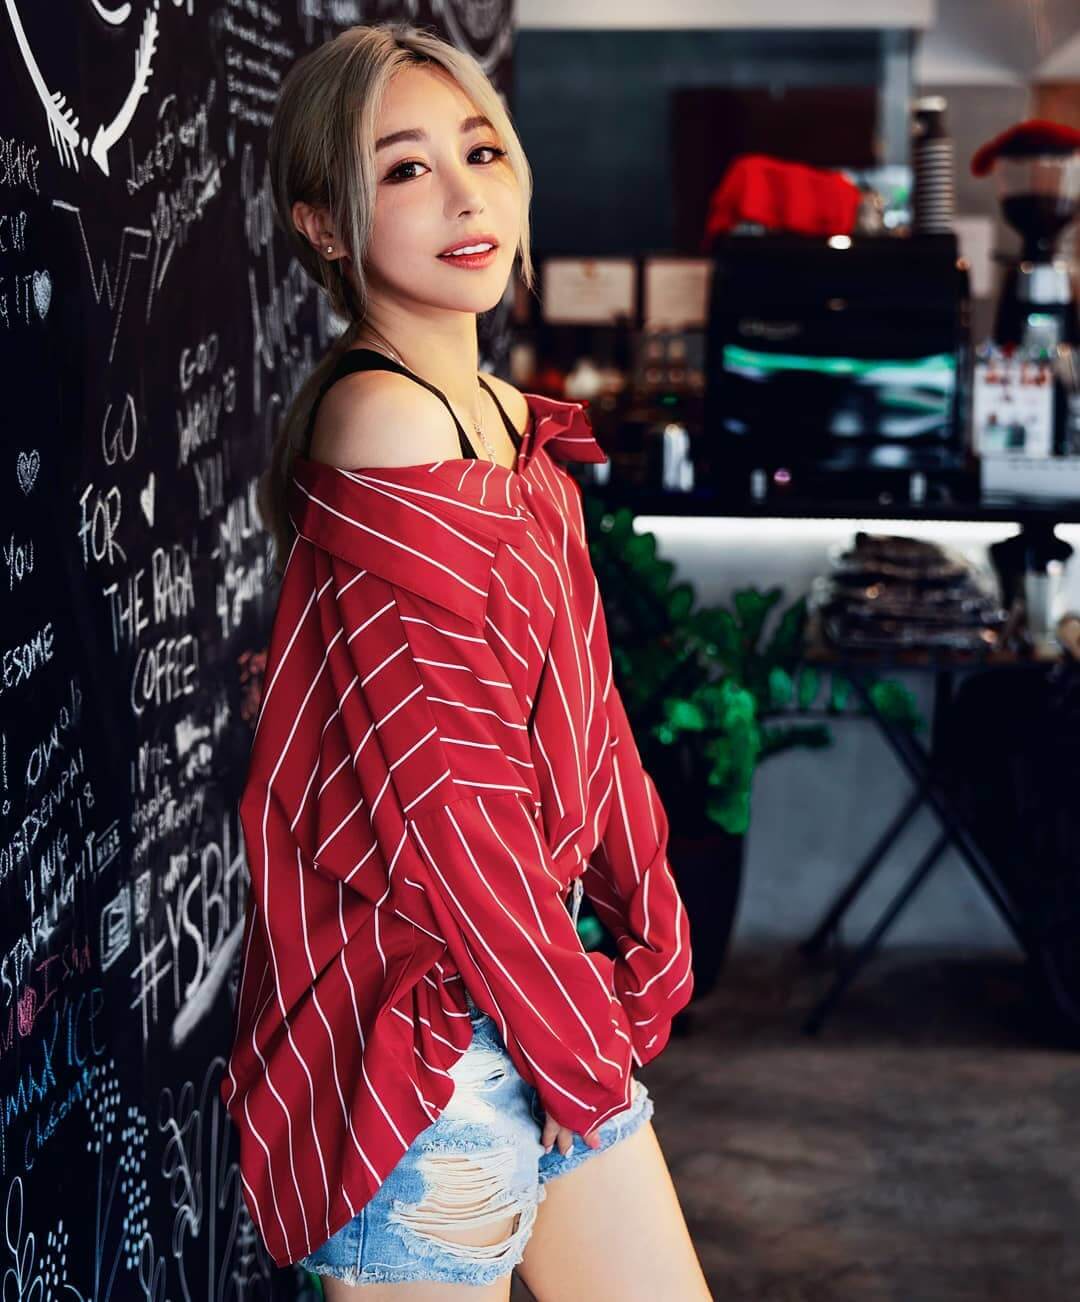 51 Hot Pictures Of Wengie Are A Genuine Masterpiece 12